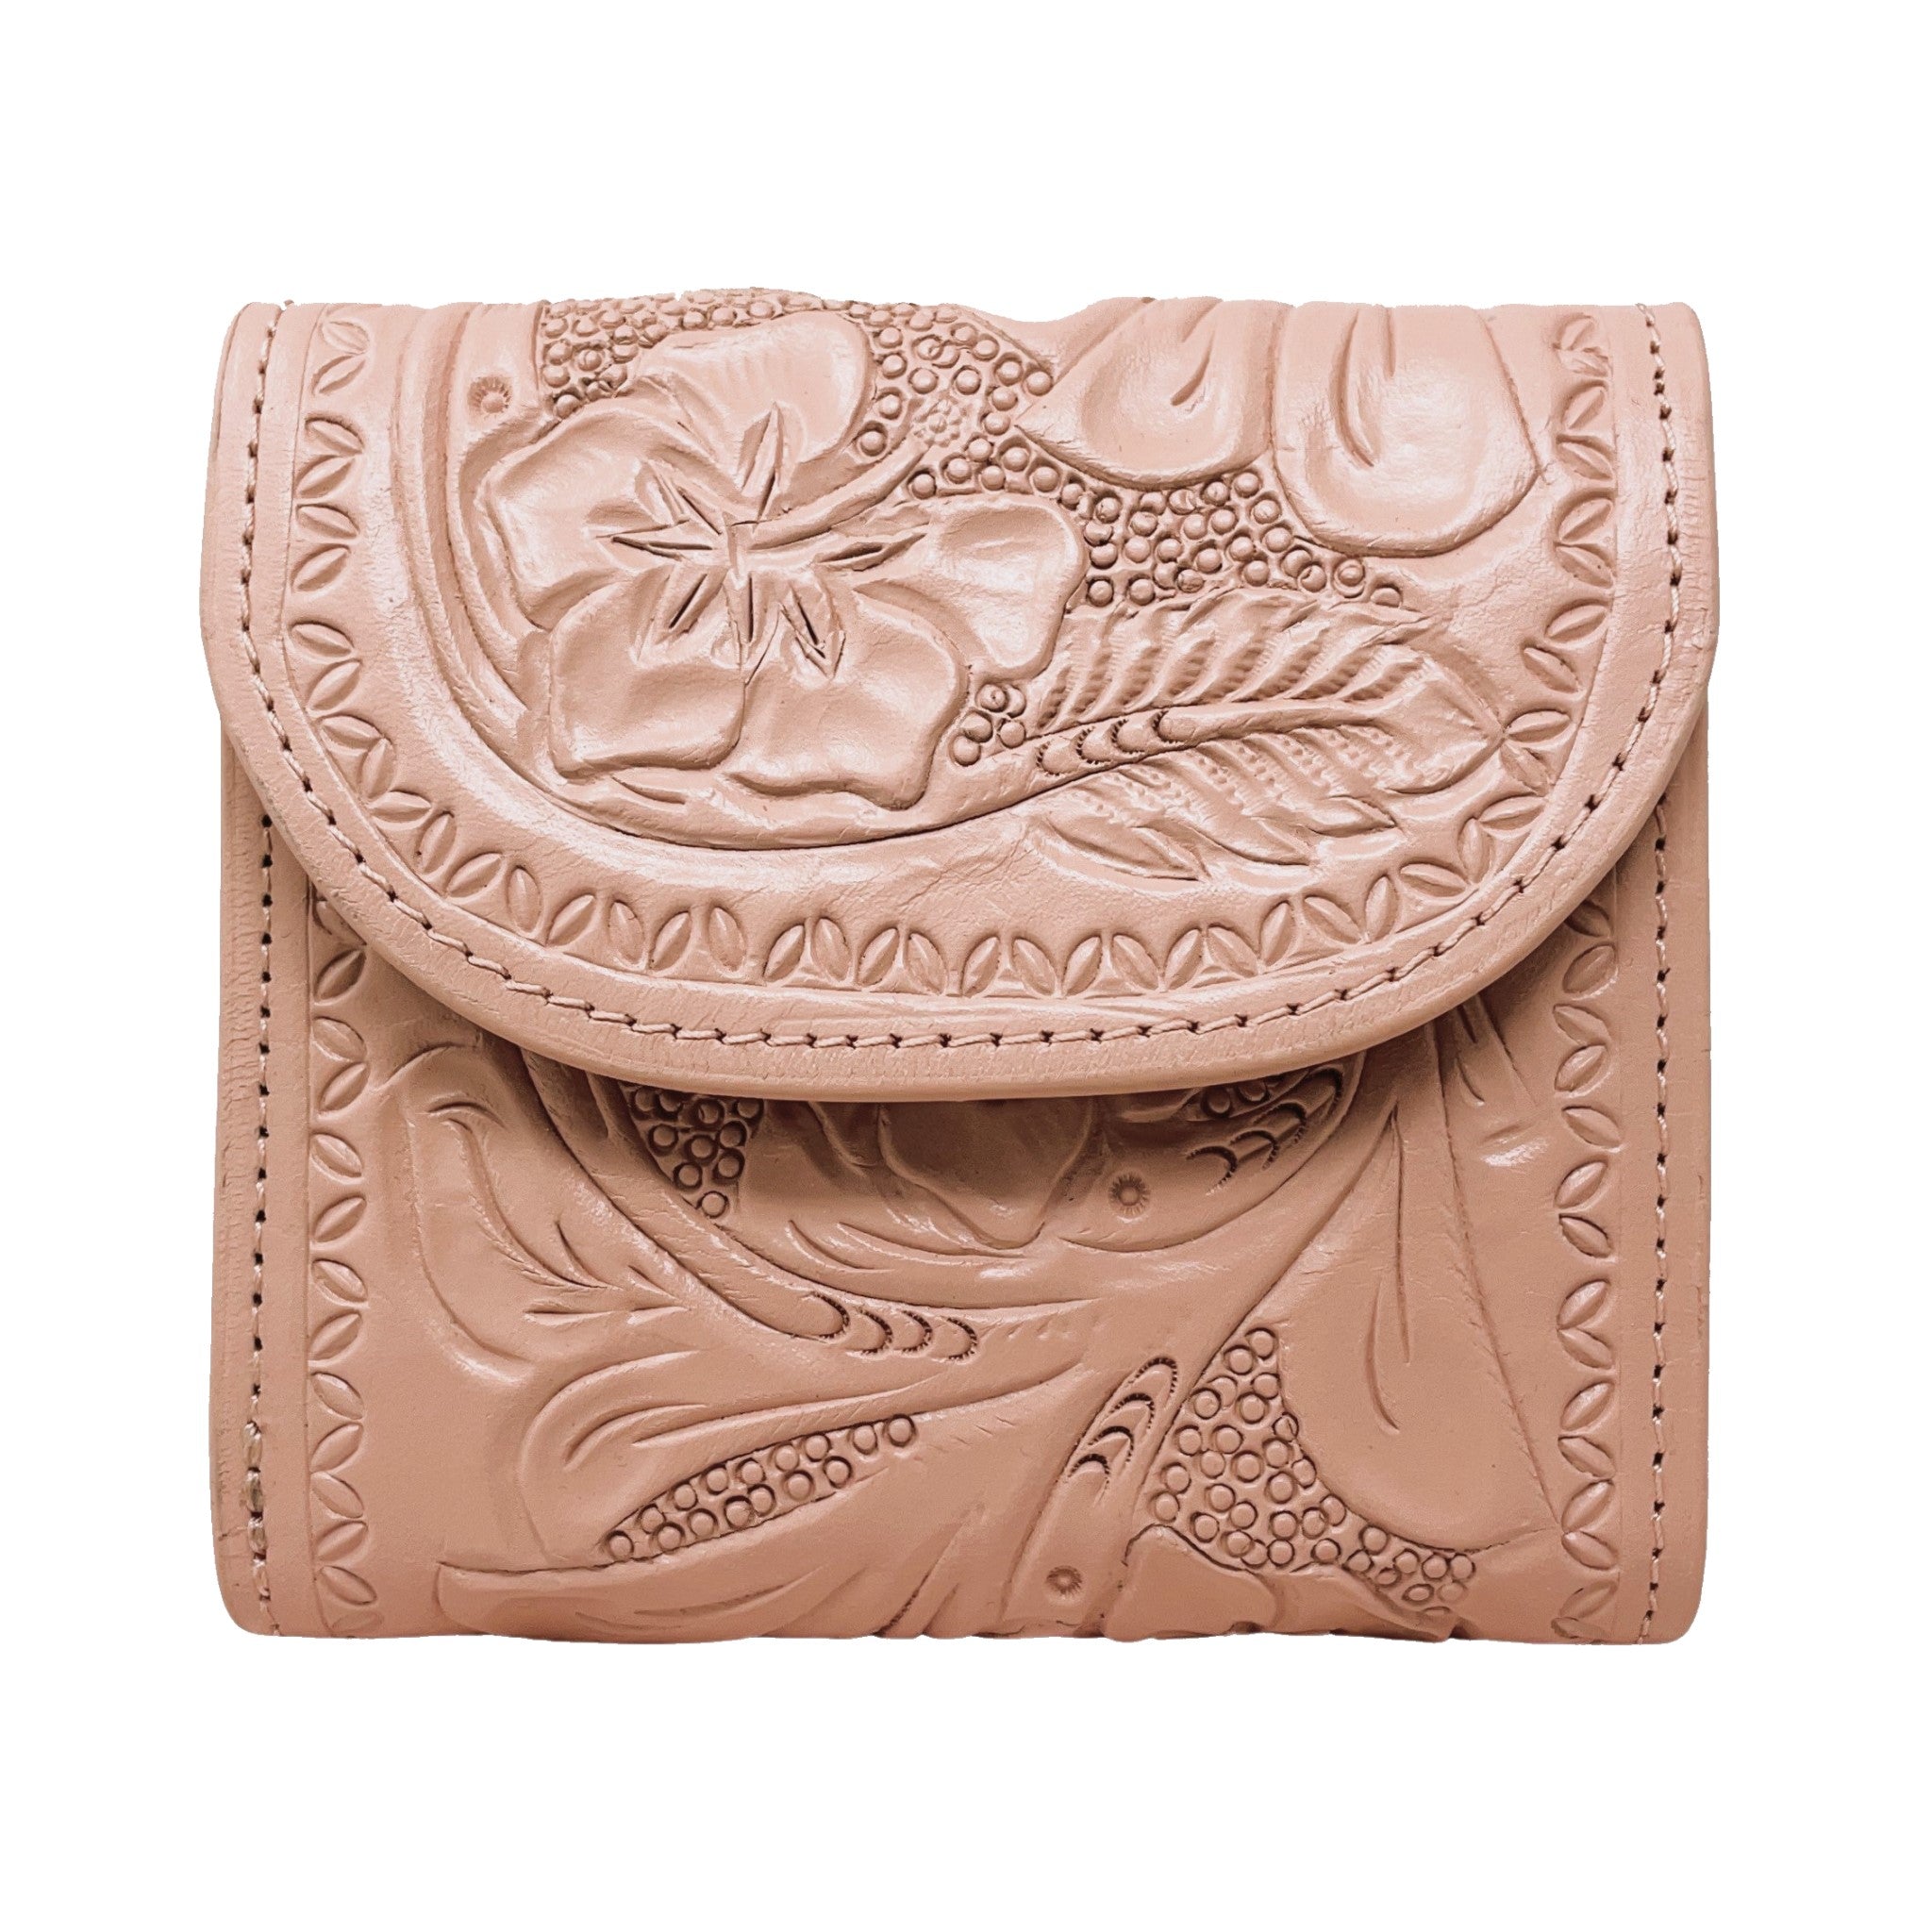 Bailey Wallet in Cherry Blossom